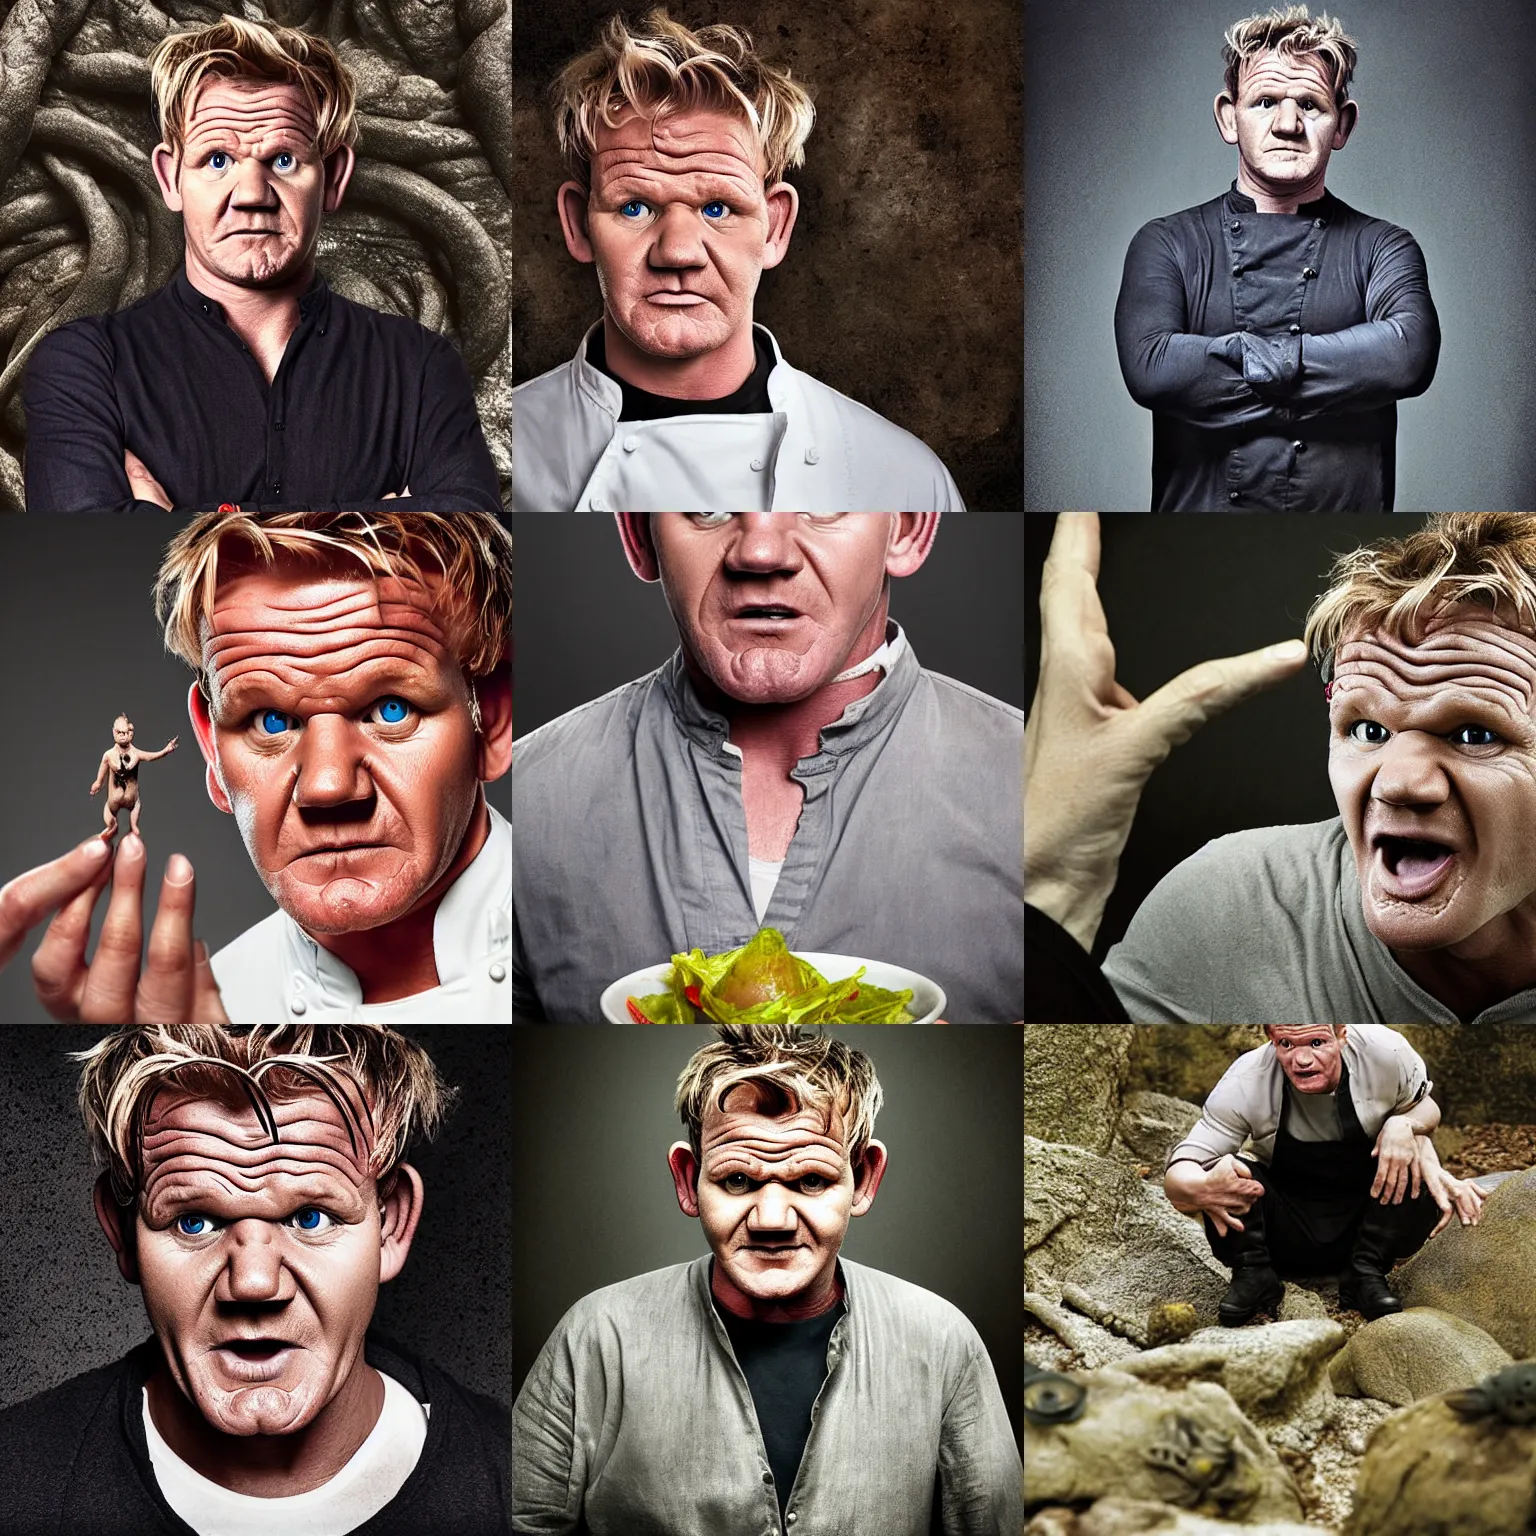 Prompt: portrait photograph, Gordon Ramsay as Gollum, still from Lord of the Rings